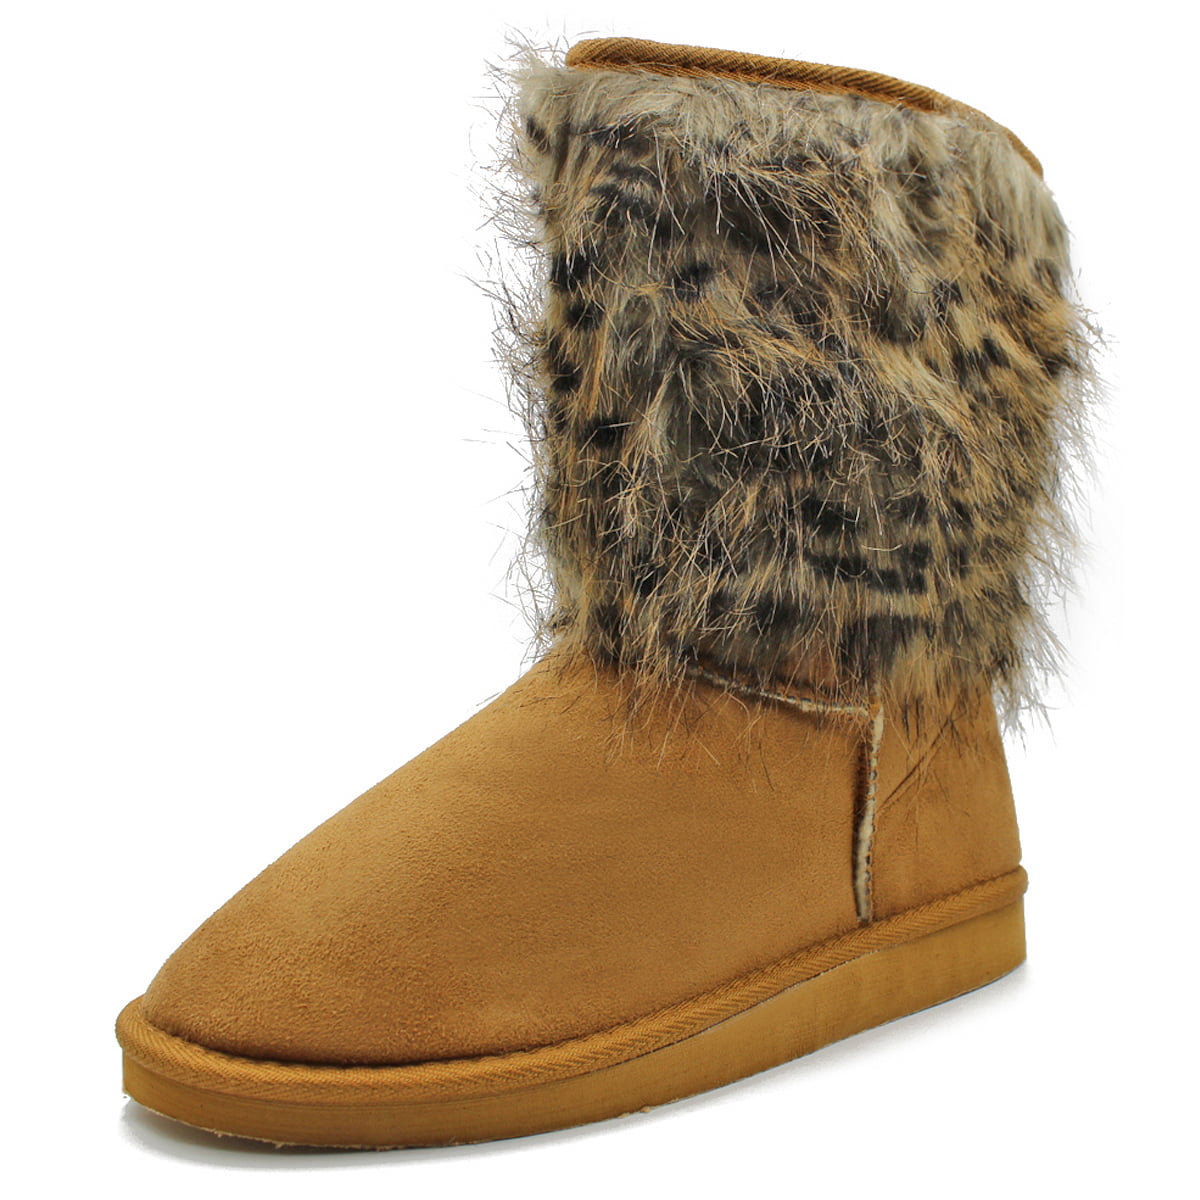 Fashion Girl Women's Faux Suede Fur Trimmed Tan Mid Calf Winter Boots 6 ...